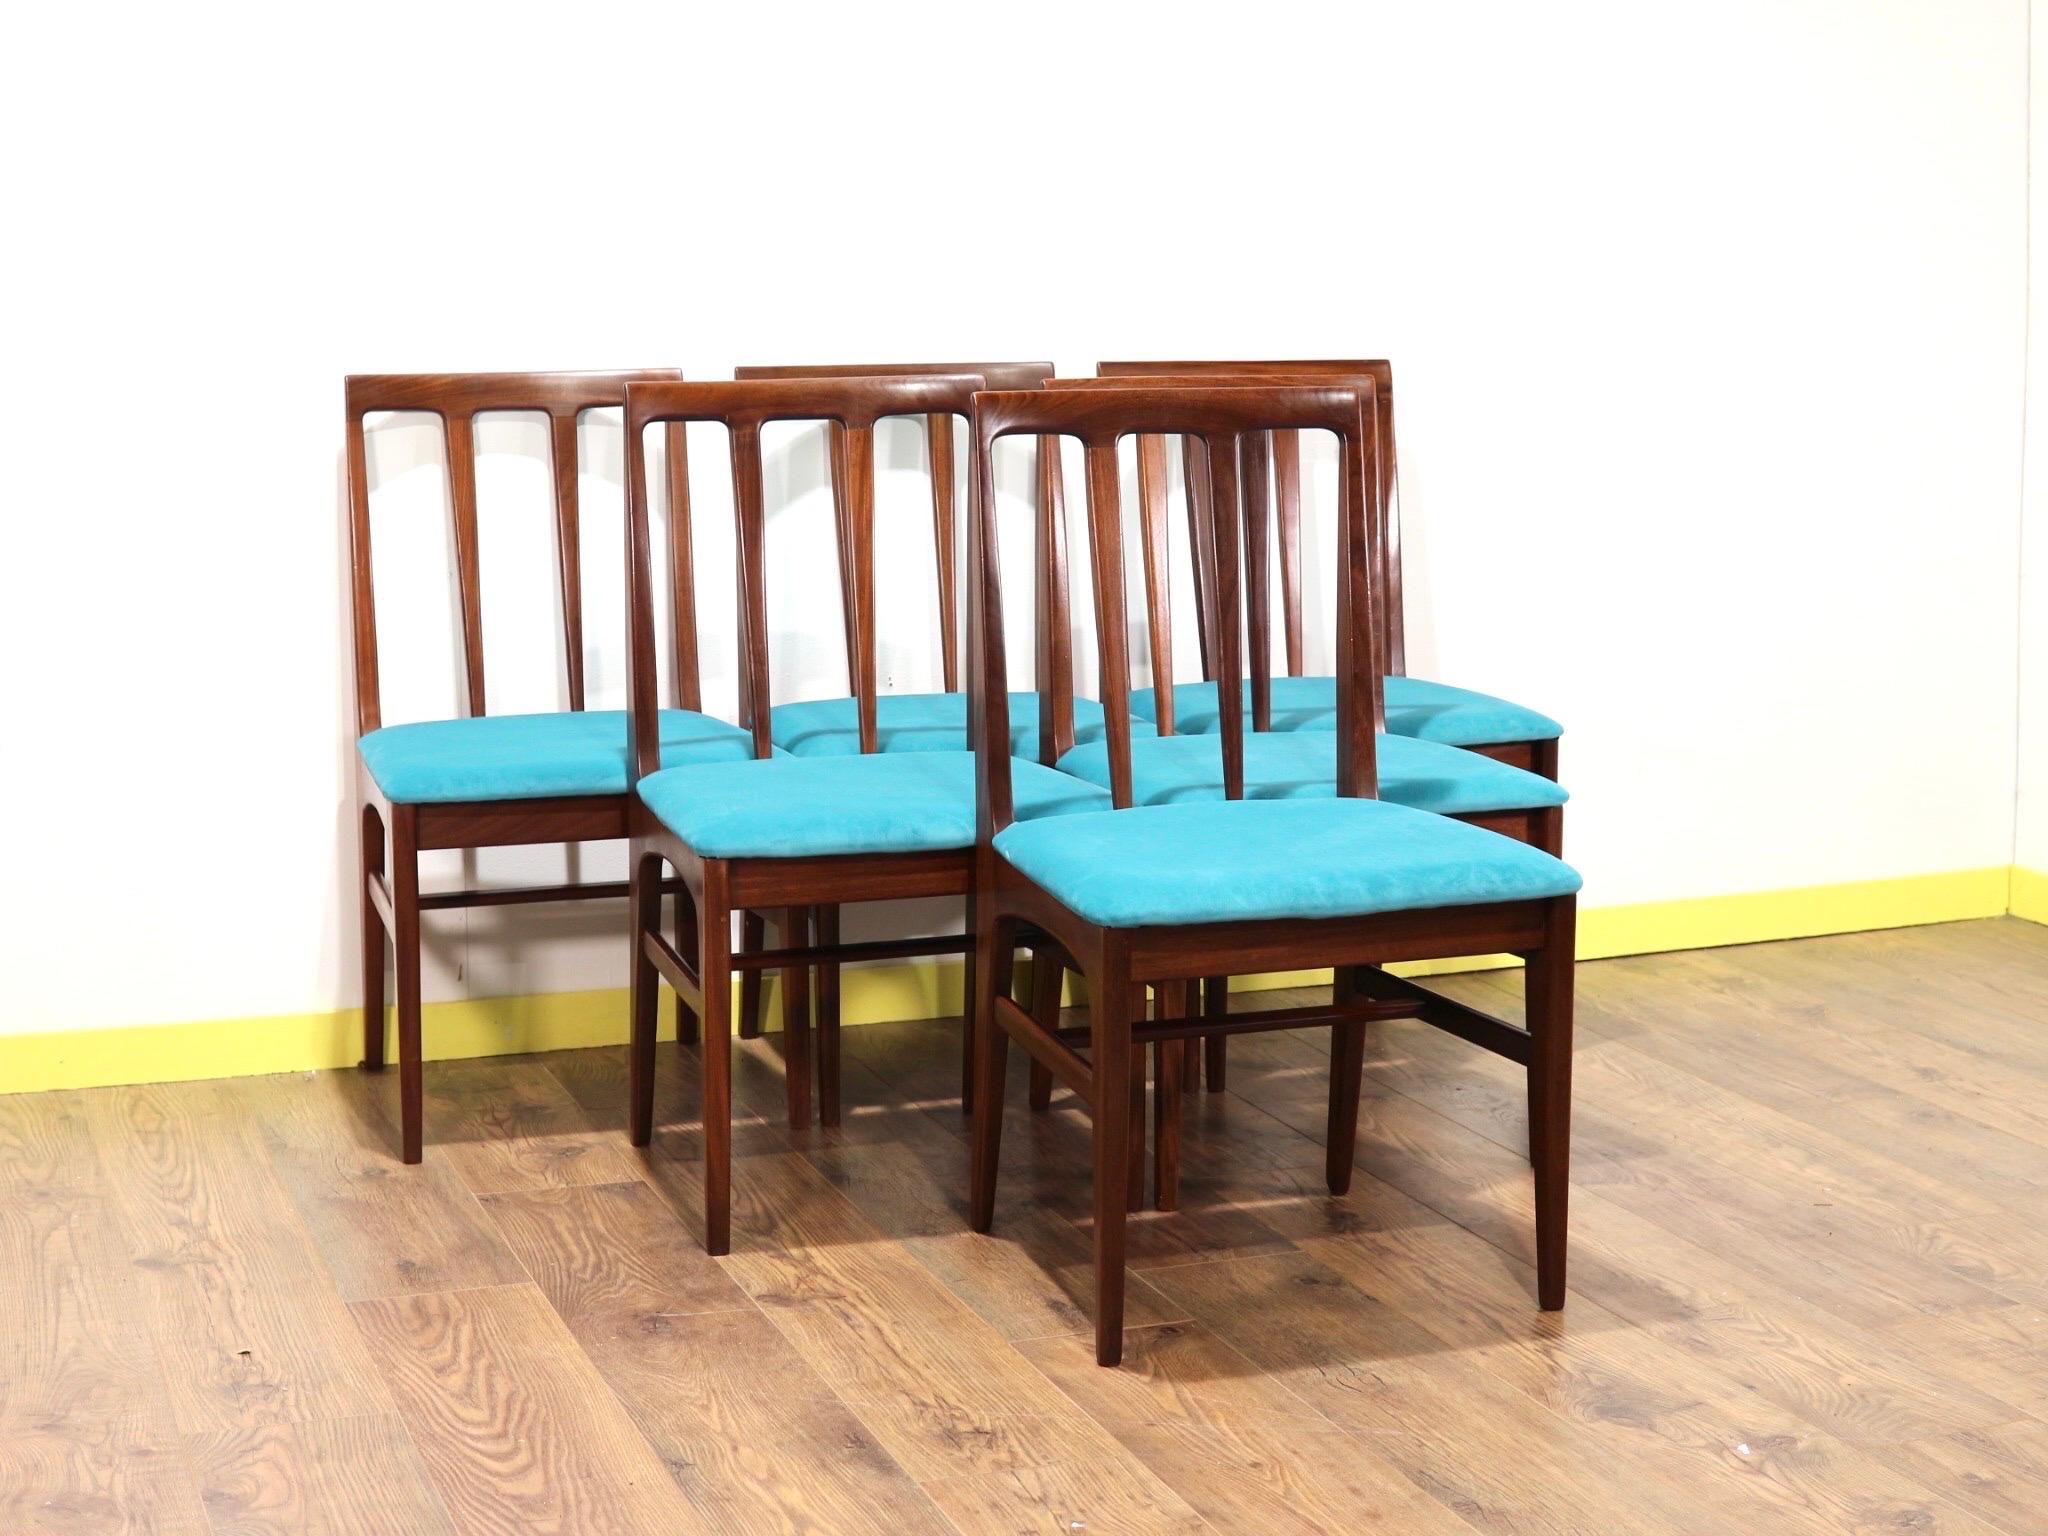 Teak Mid-Century Modern Aromosia Danish Style Dining Chairs by Younger x 6